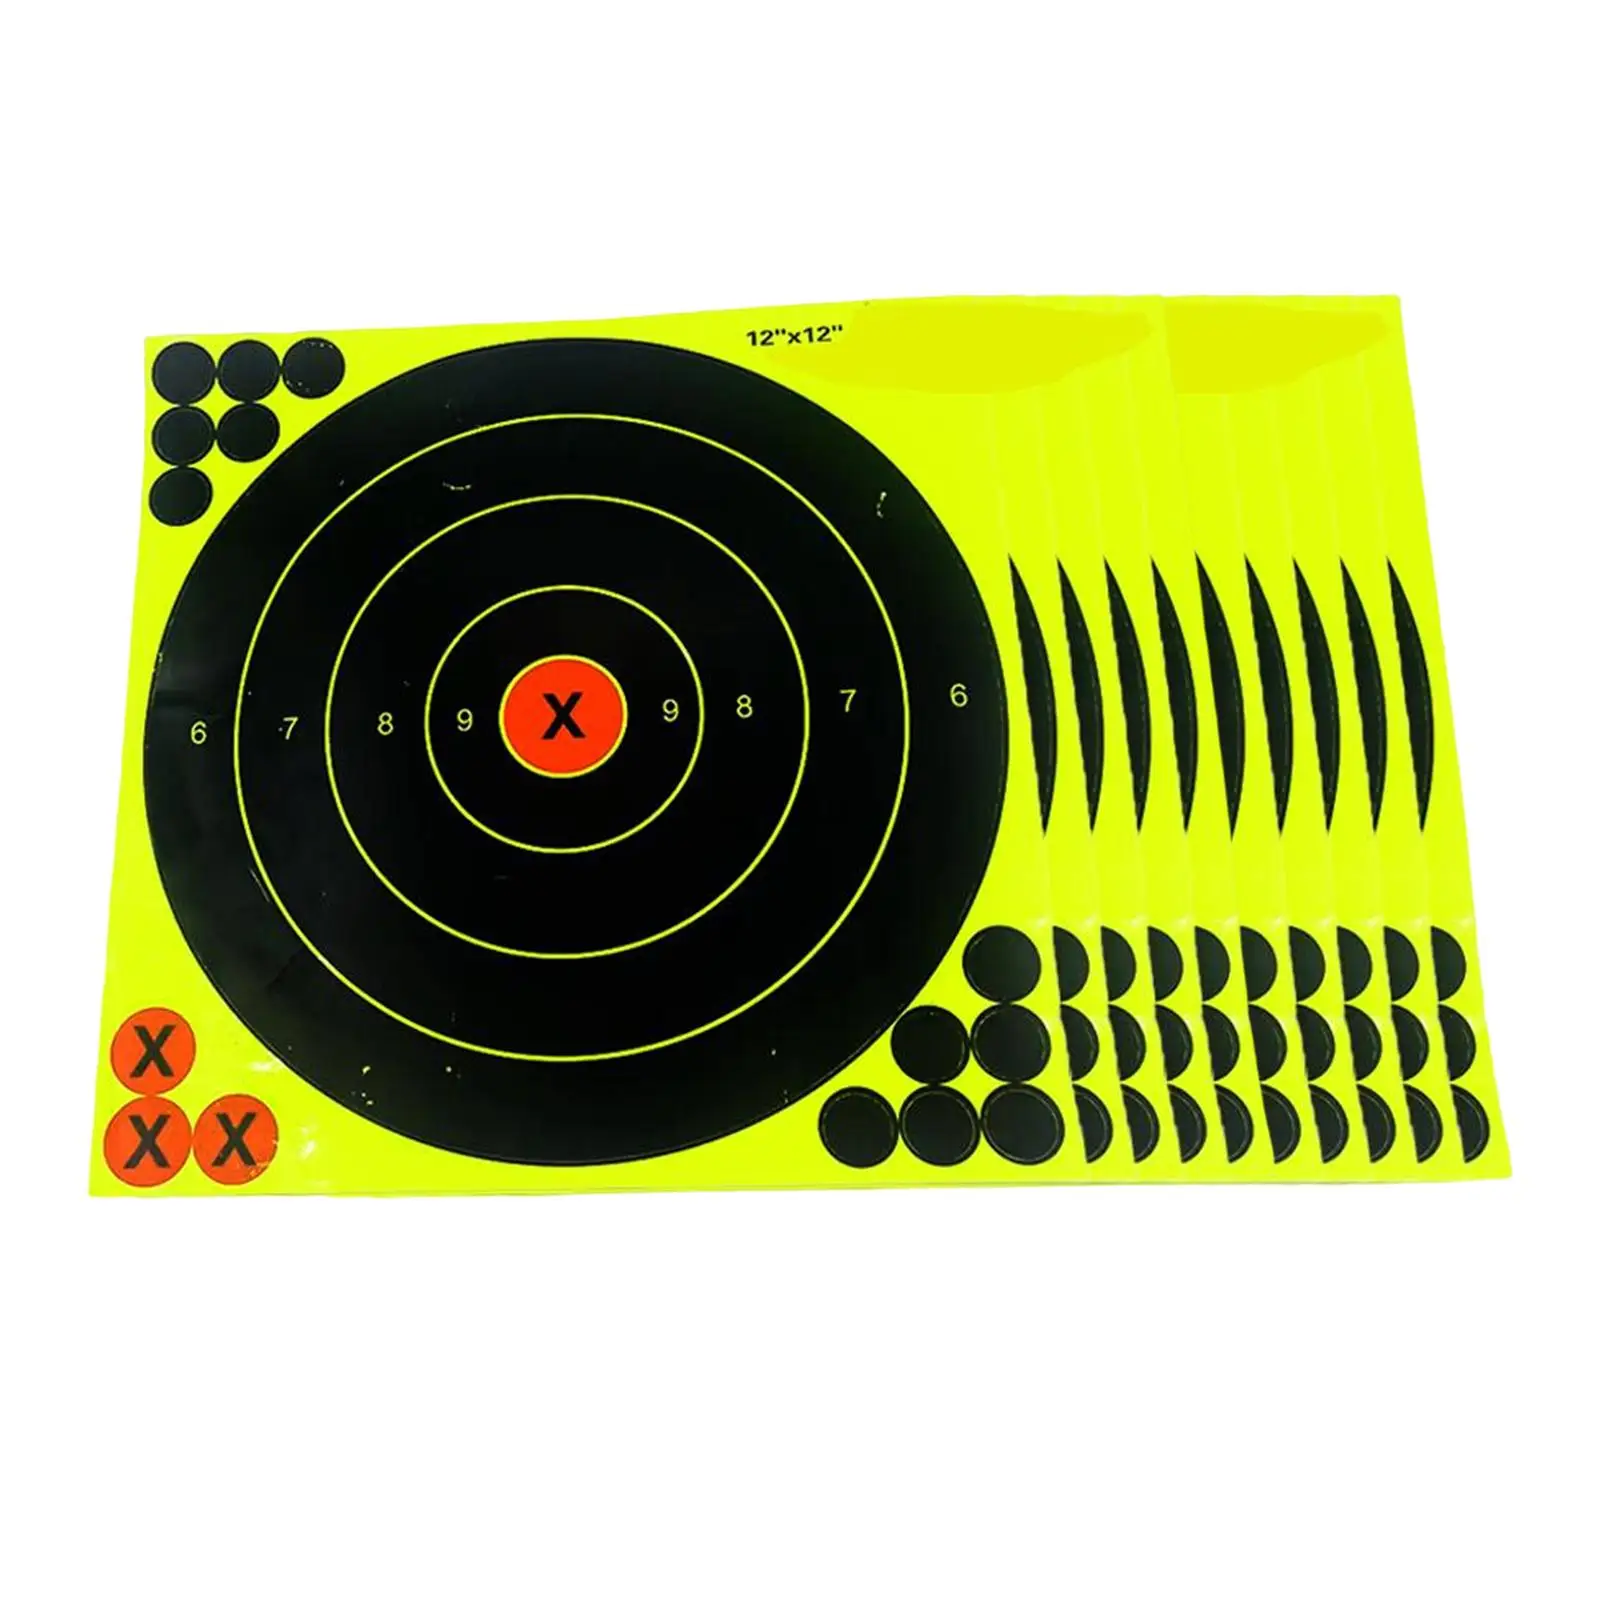 10x 12inch Shooting Targets Splatter Reactive Paper Sticker Adhesive Paste Paper Target for Outdoor Training Range Practice Bow